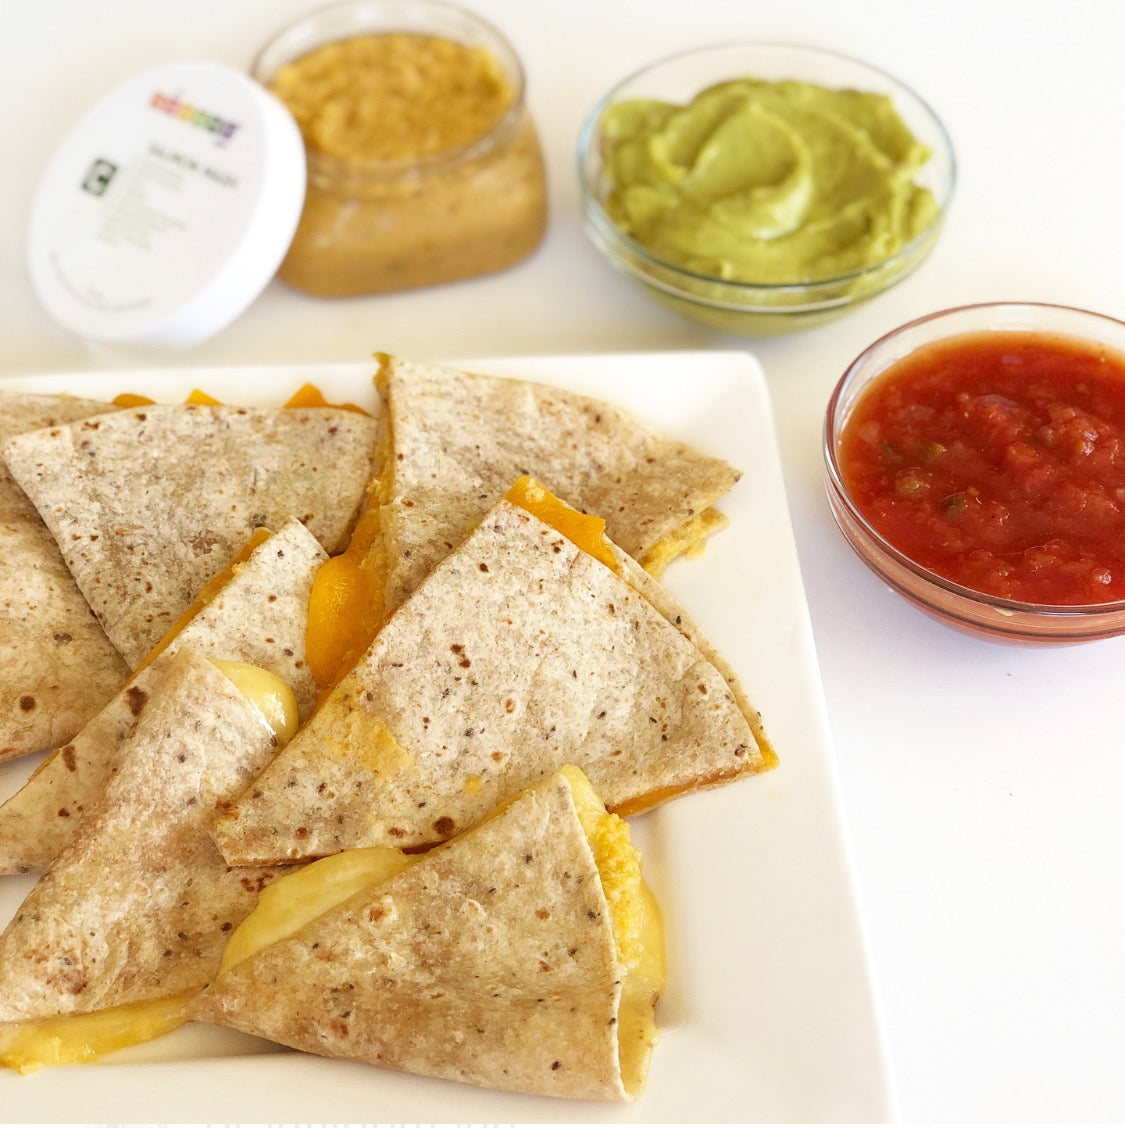 Cheesy salmon quesadilla made with square baby puree baby food